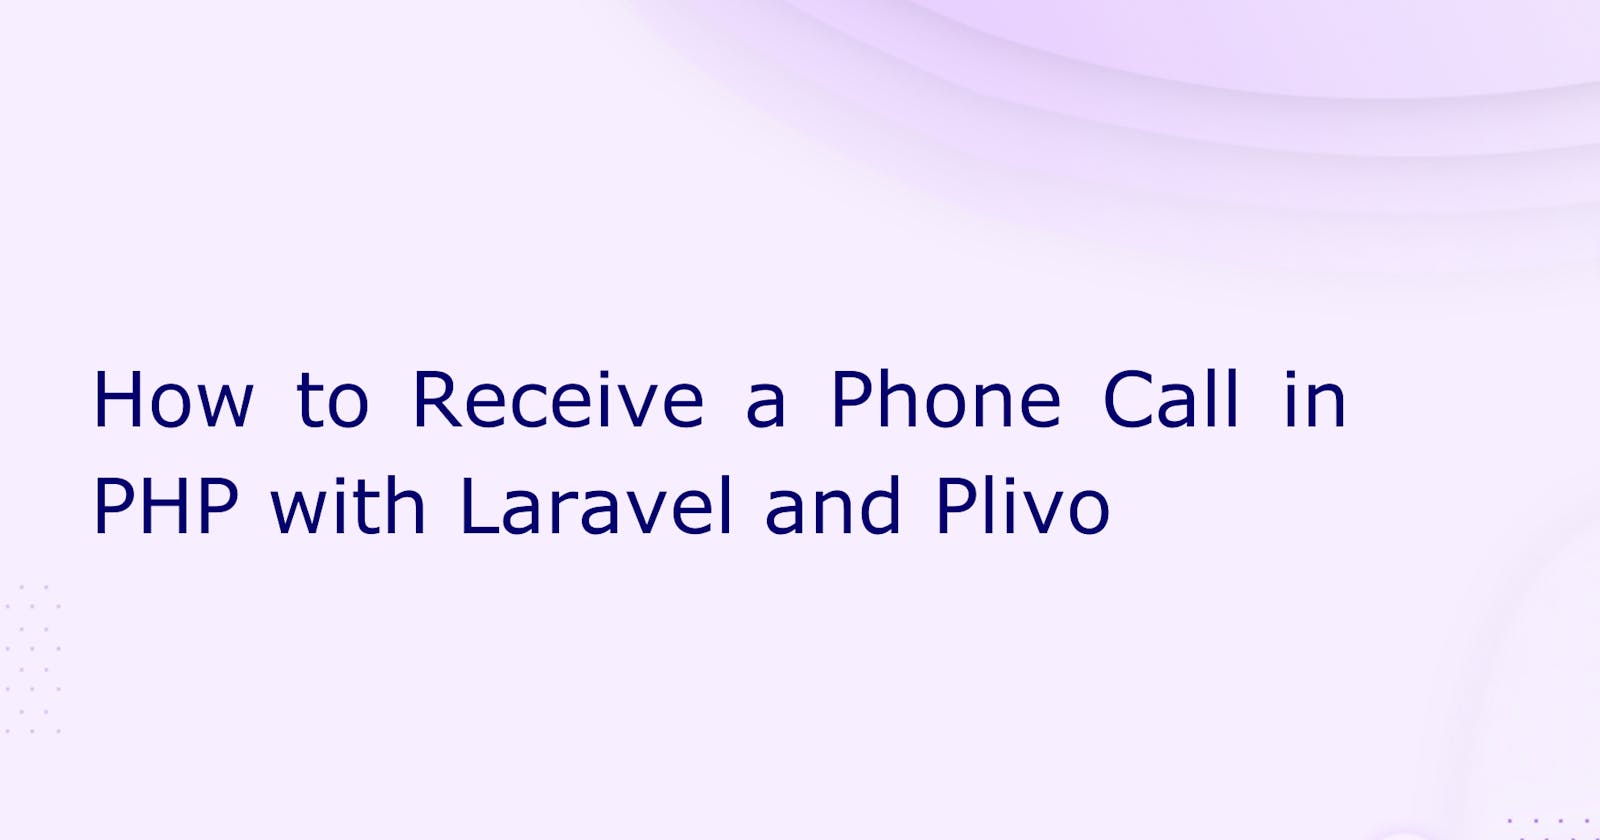 How to Receive a Phone Call in PHP with Laravel and Plivo